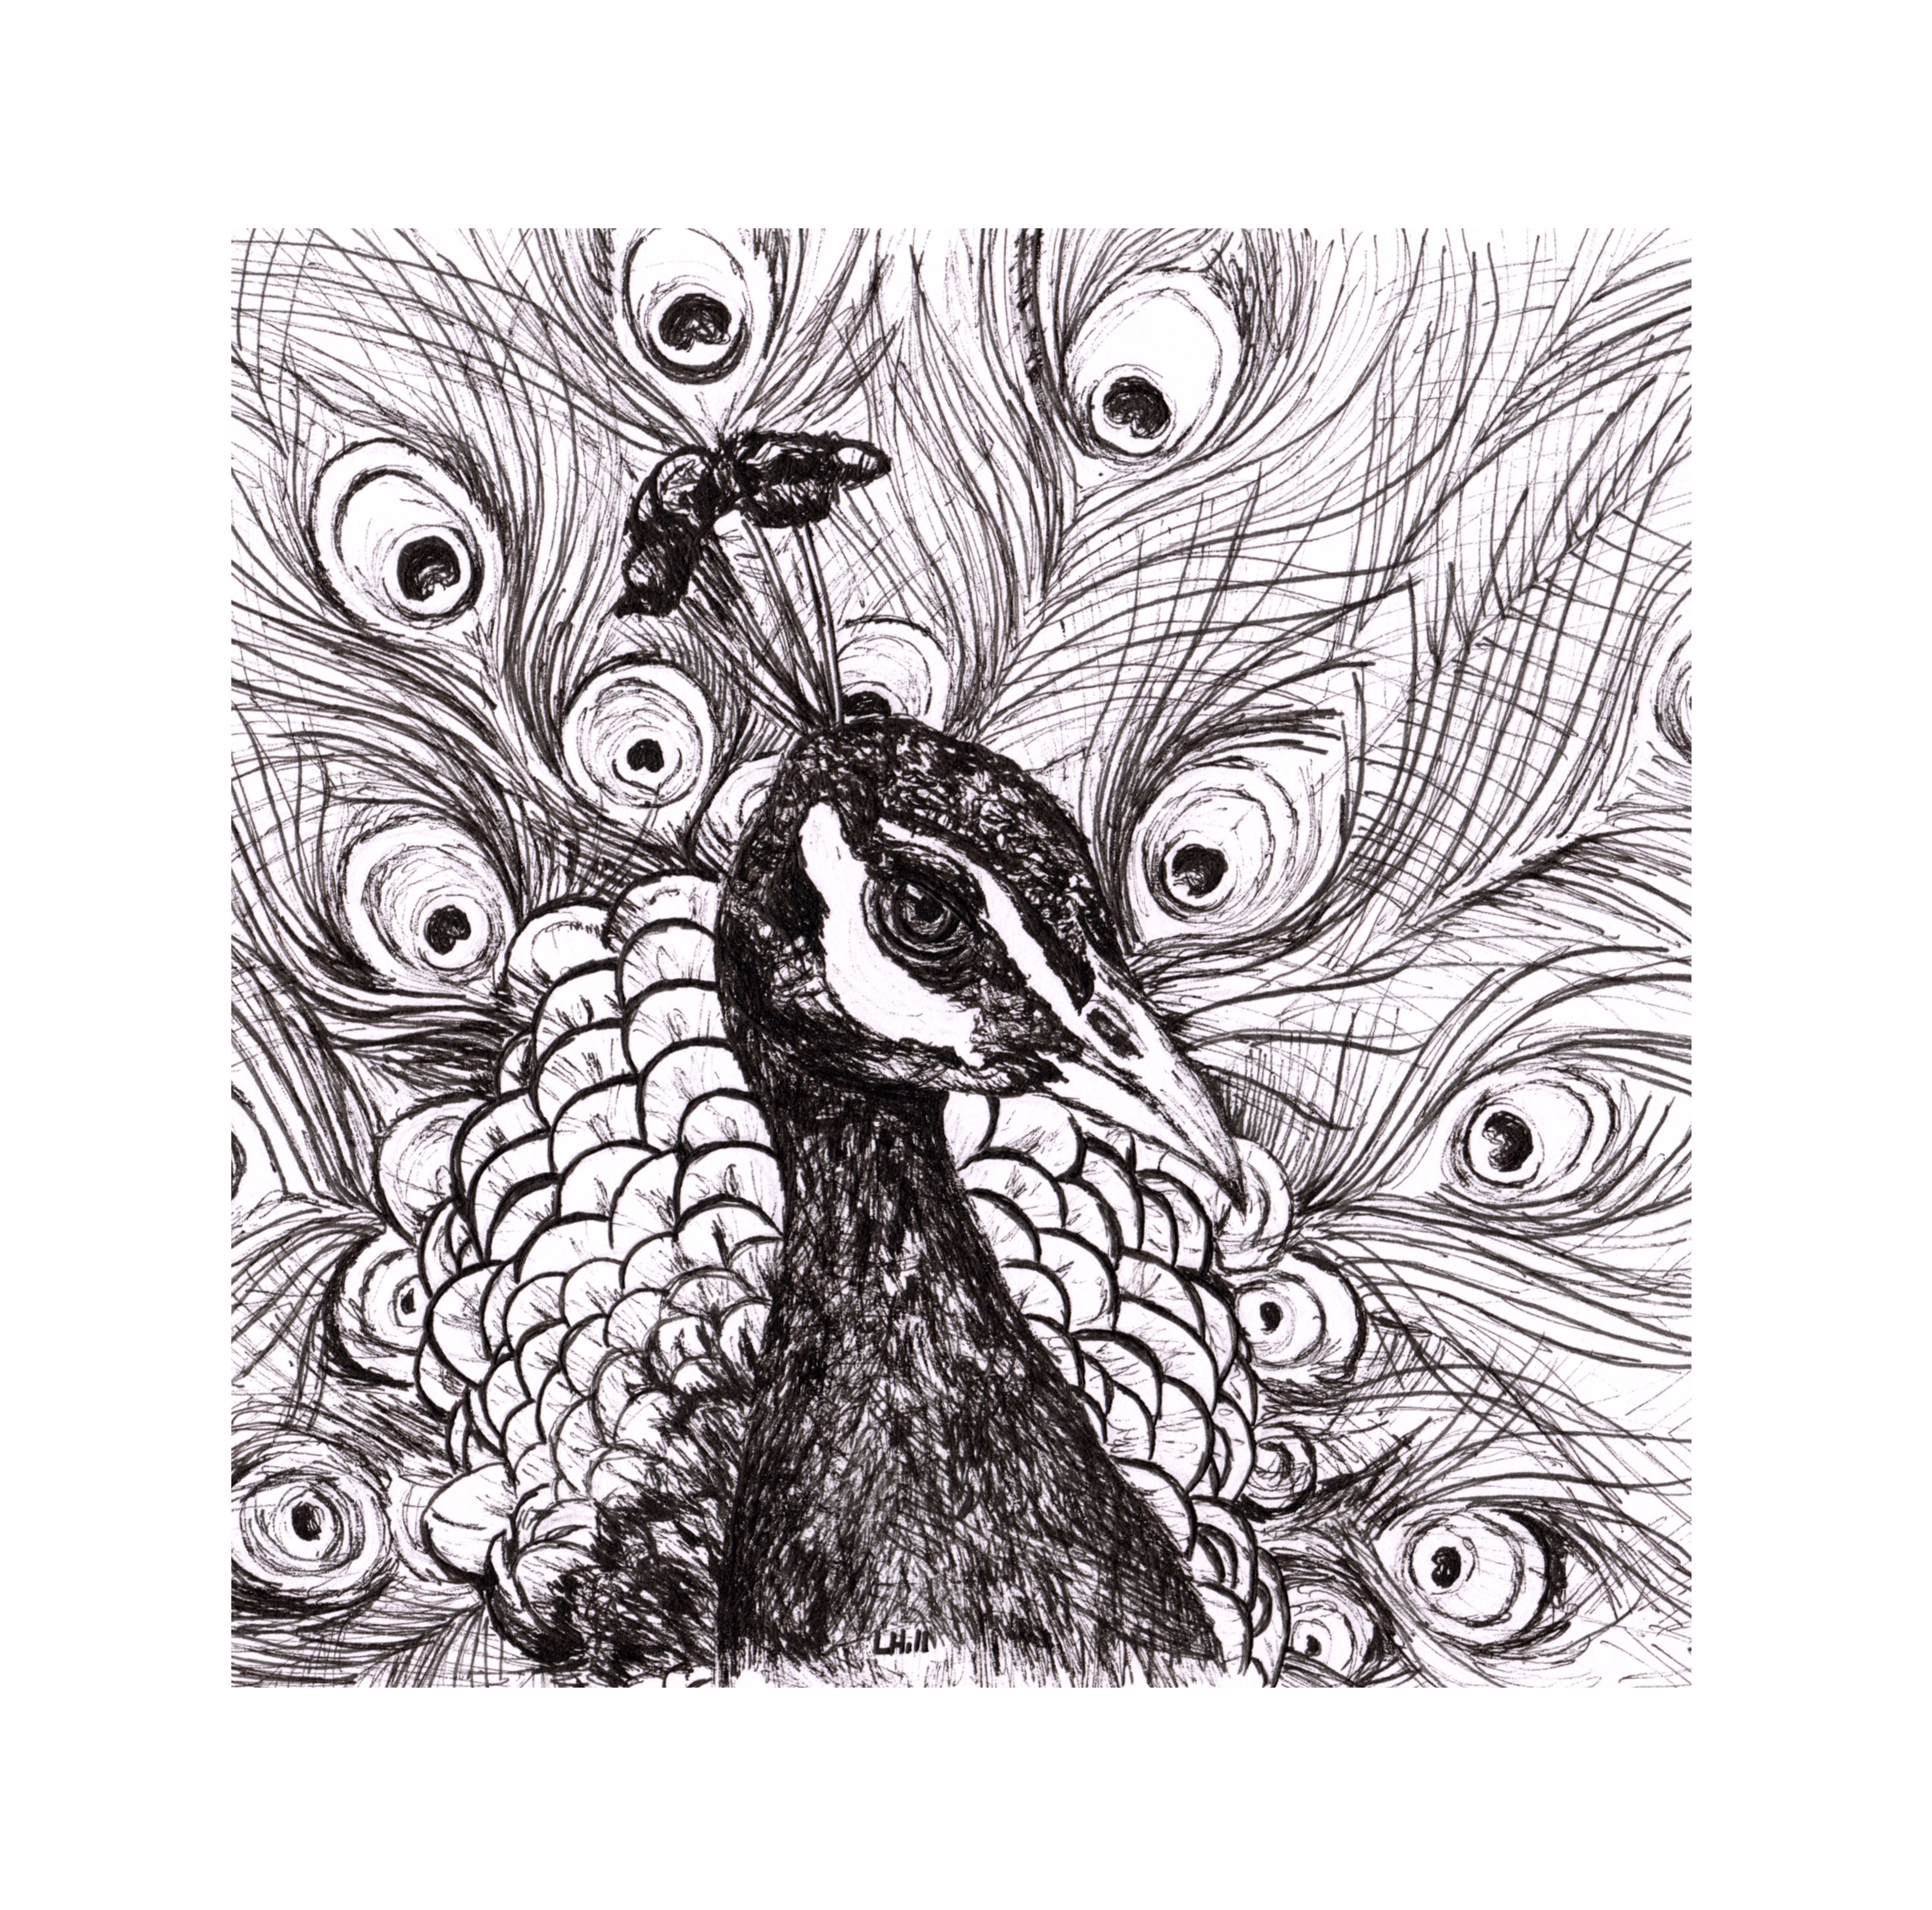 Peacock pen and ink illustration by Louisa Hill